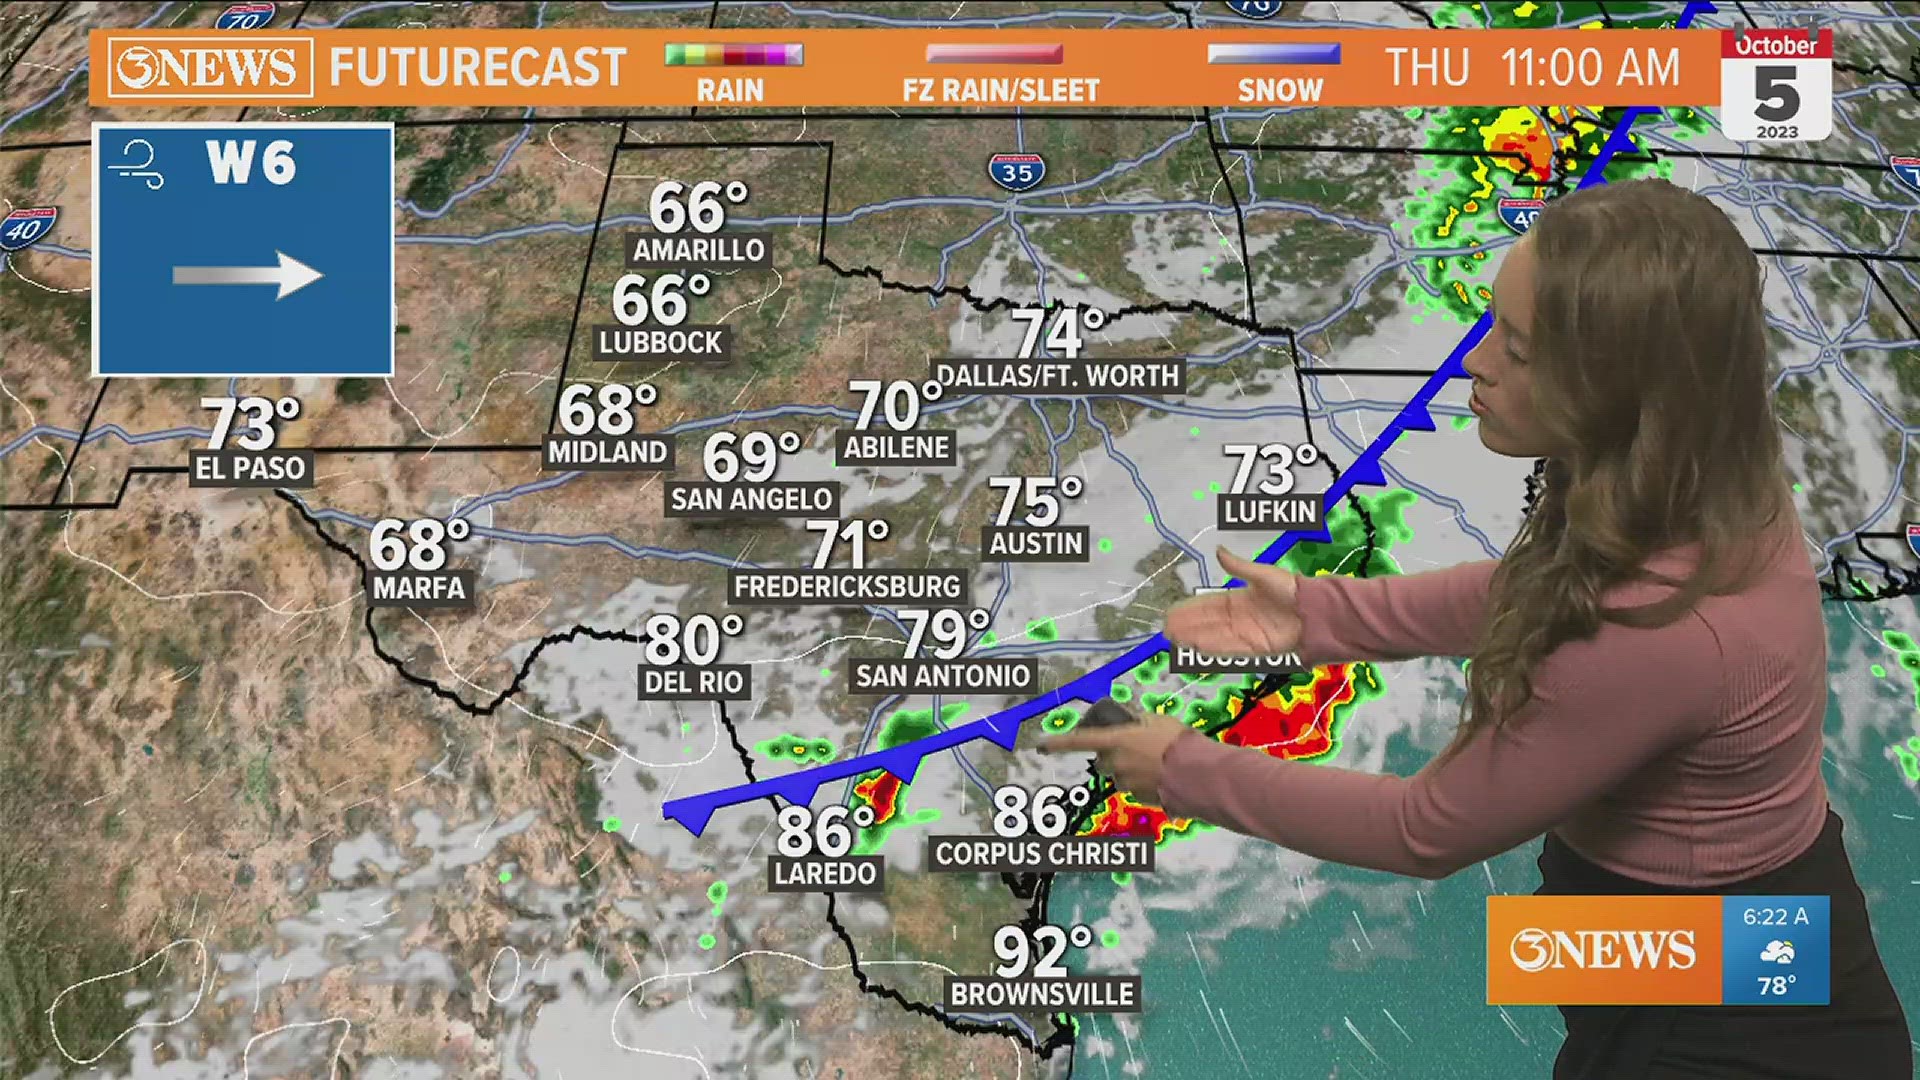 Hit & miss showers or storms will be in play through WED. A cold front moving through the region will deliver more rain THU/FRI & cooler temperatures this weekend.